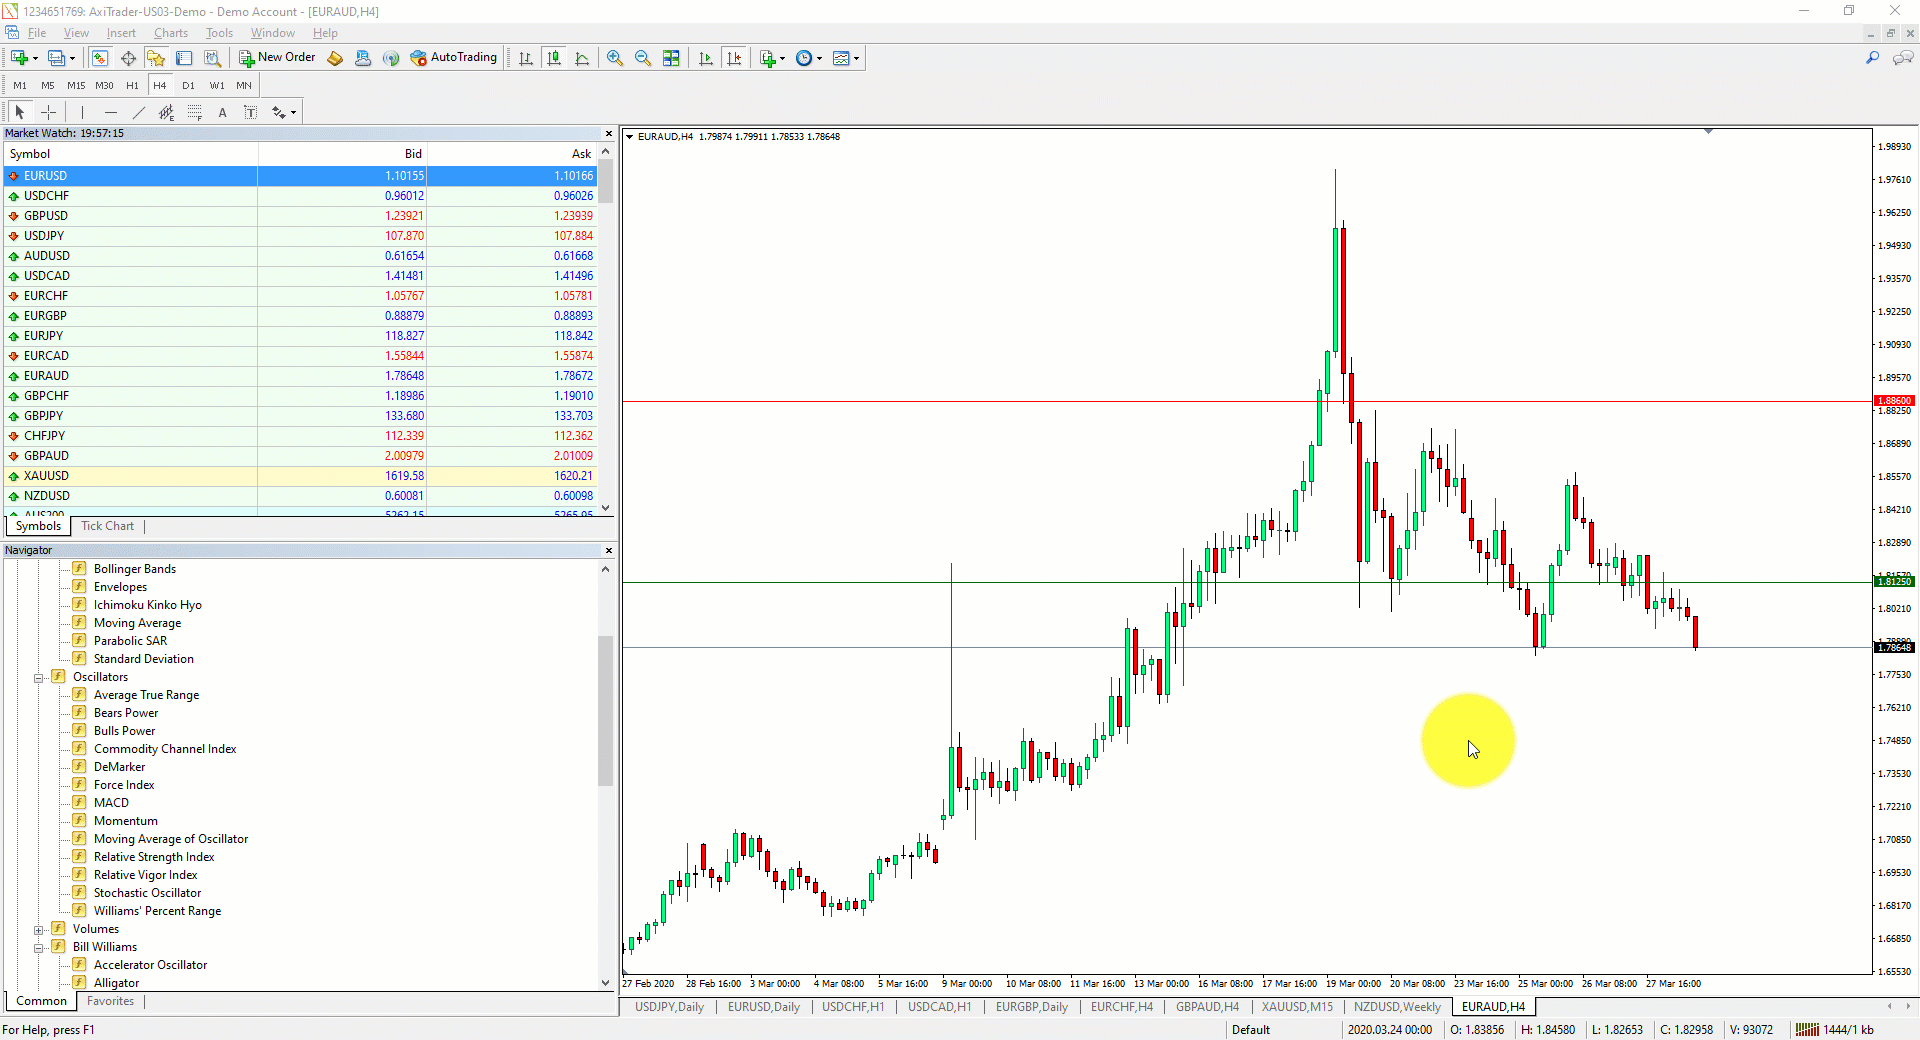 Opening a New Chart in MetaTrader 4 using the toolbox button